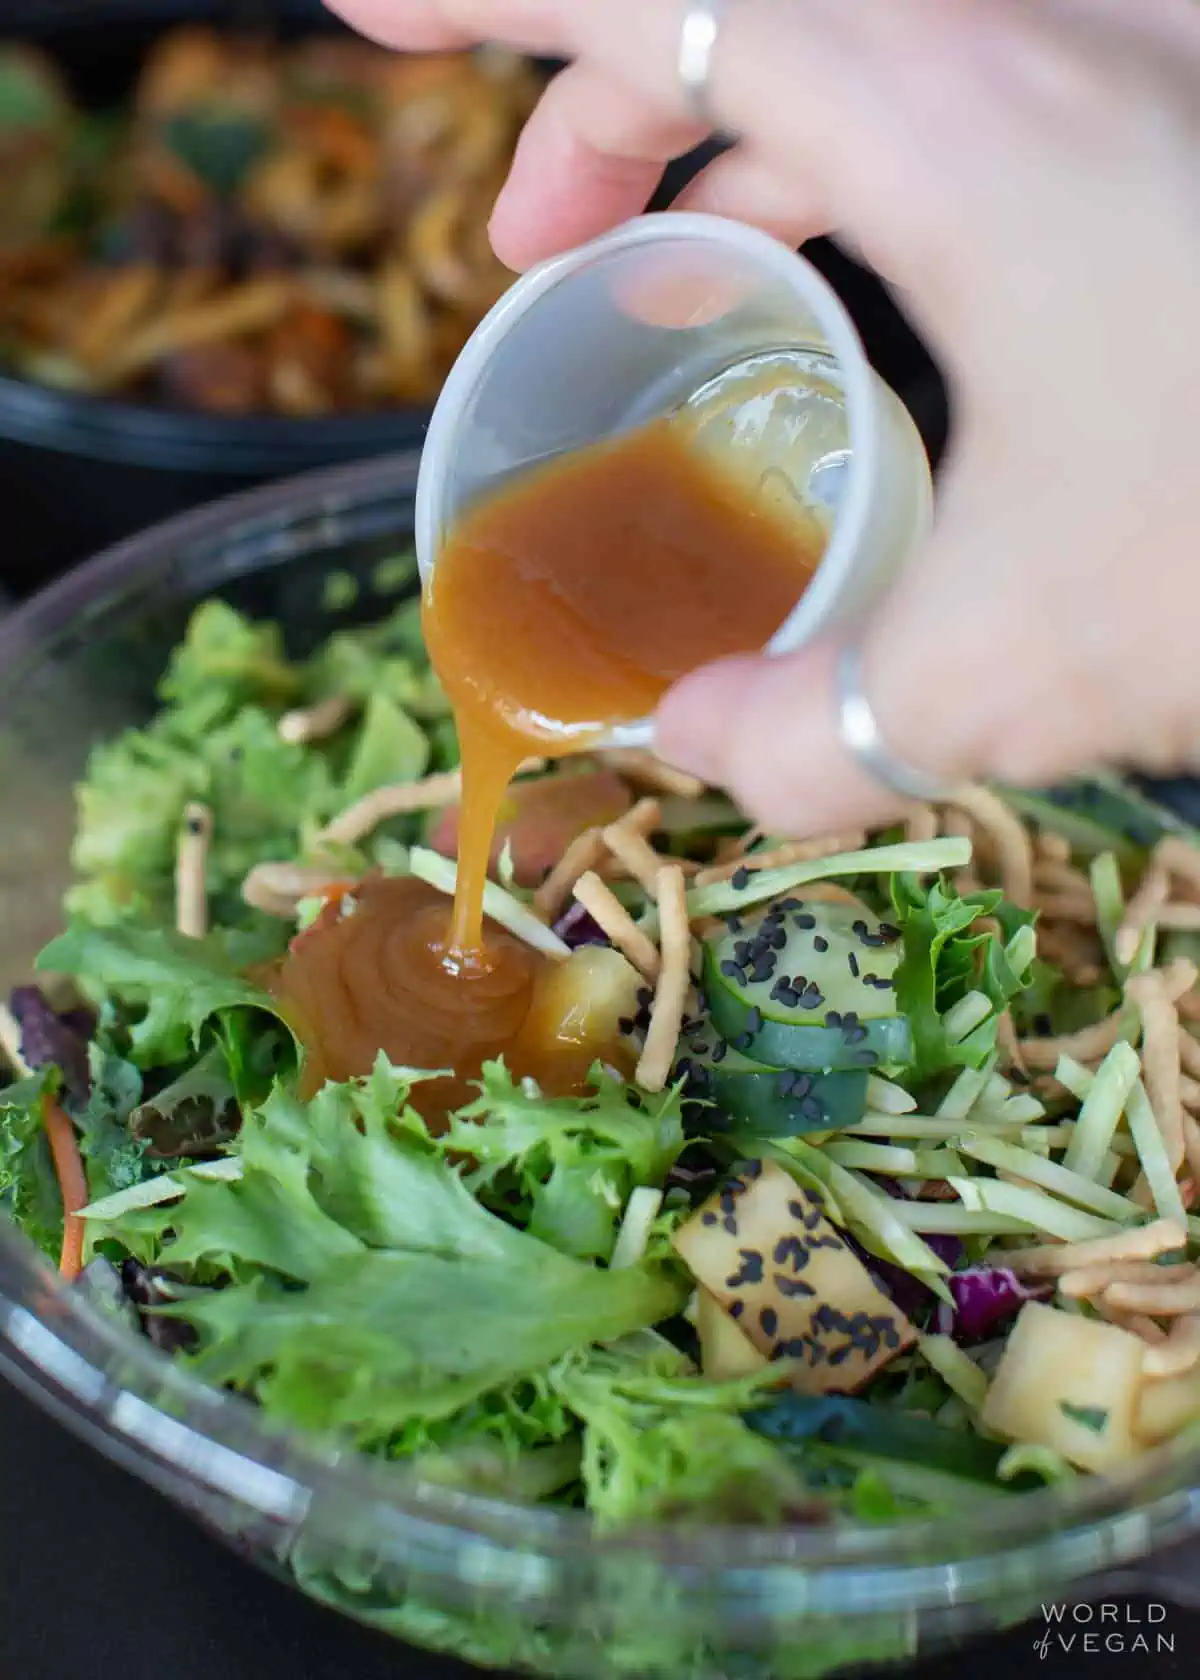 pouring dressing over the vegan asian salad at noodles and company